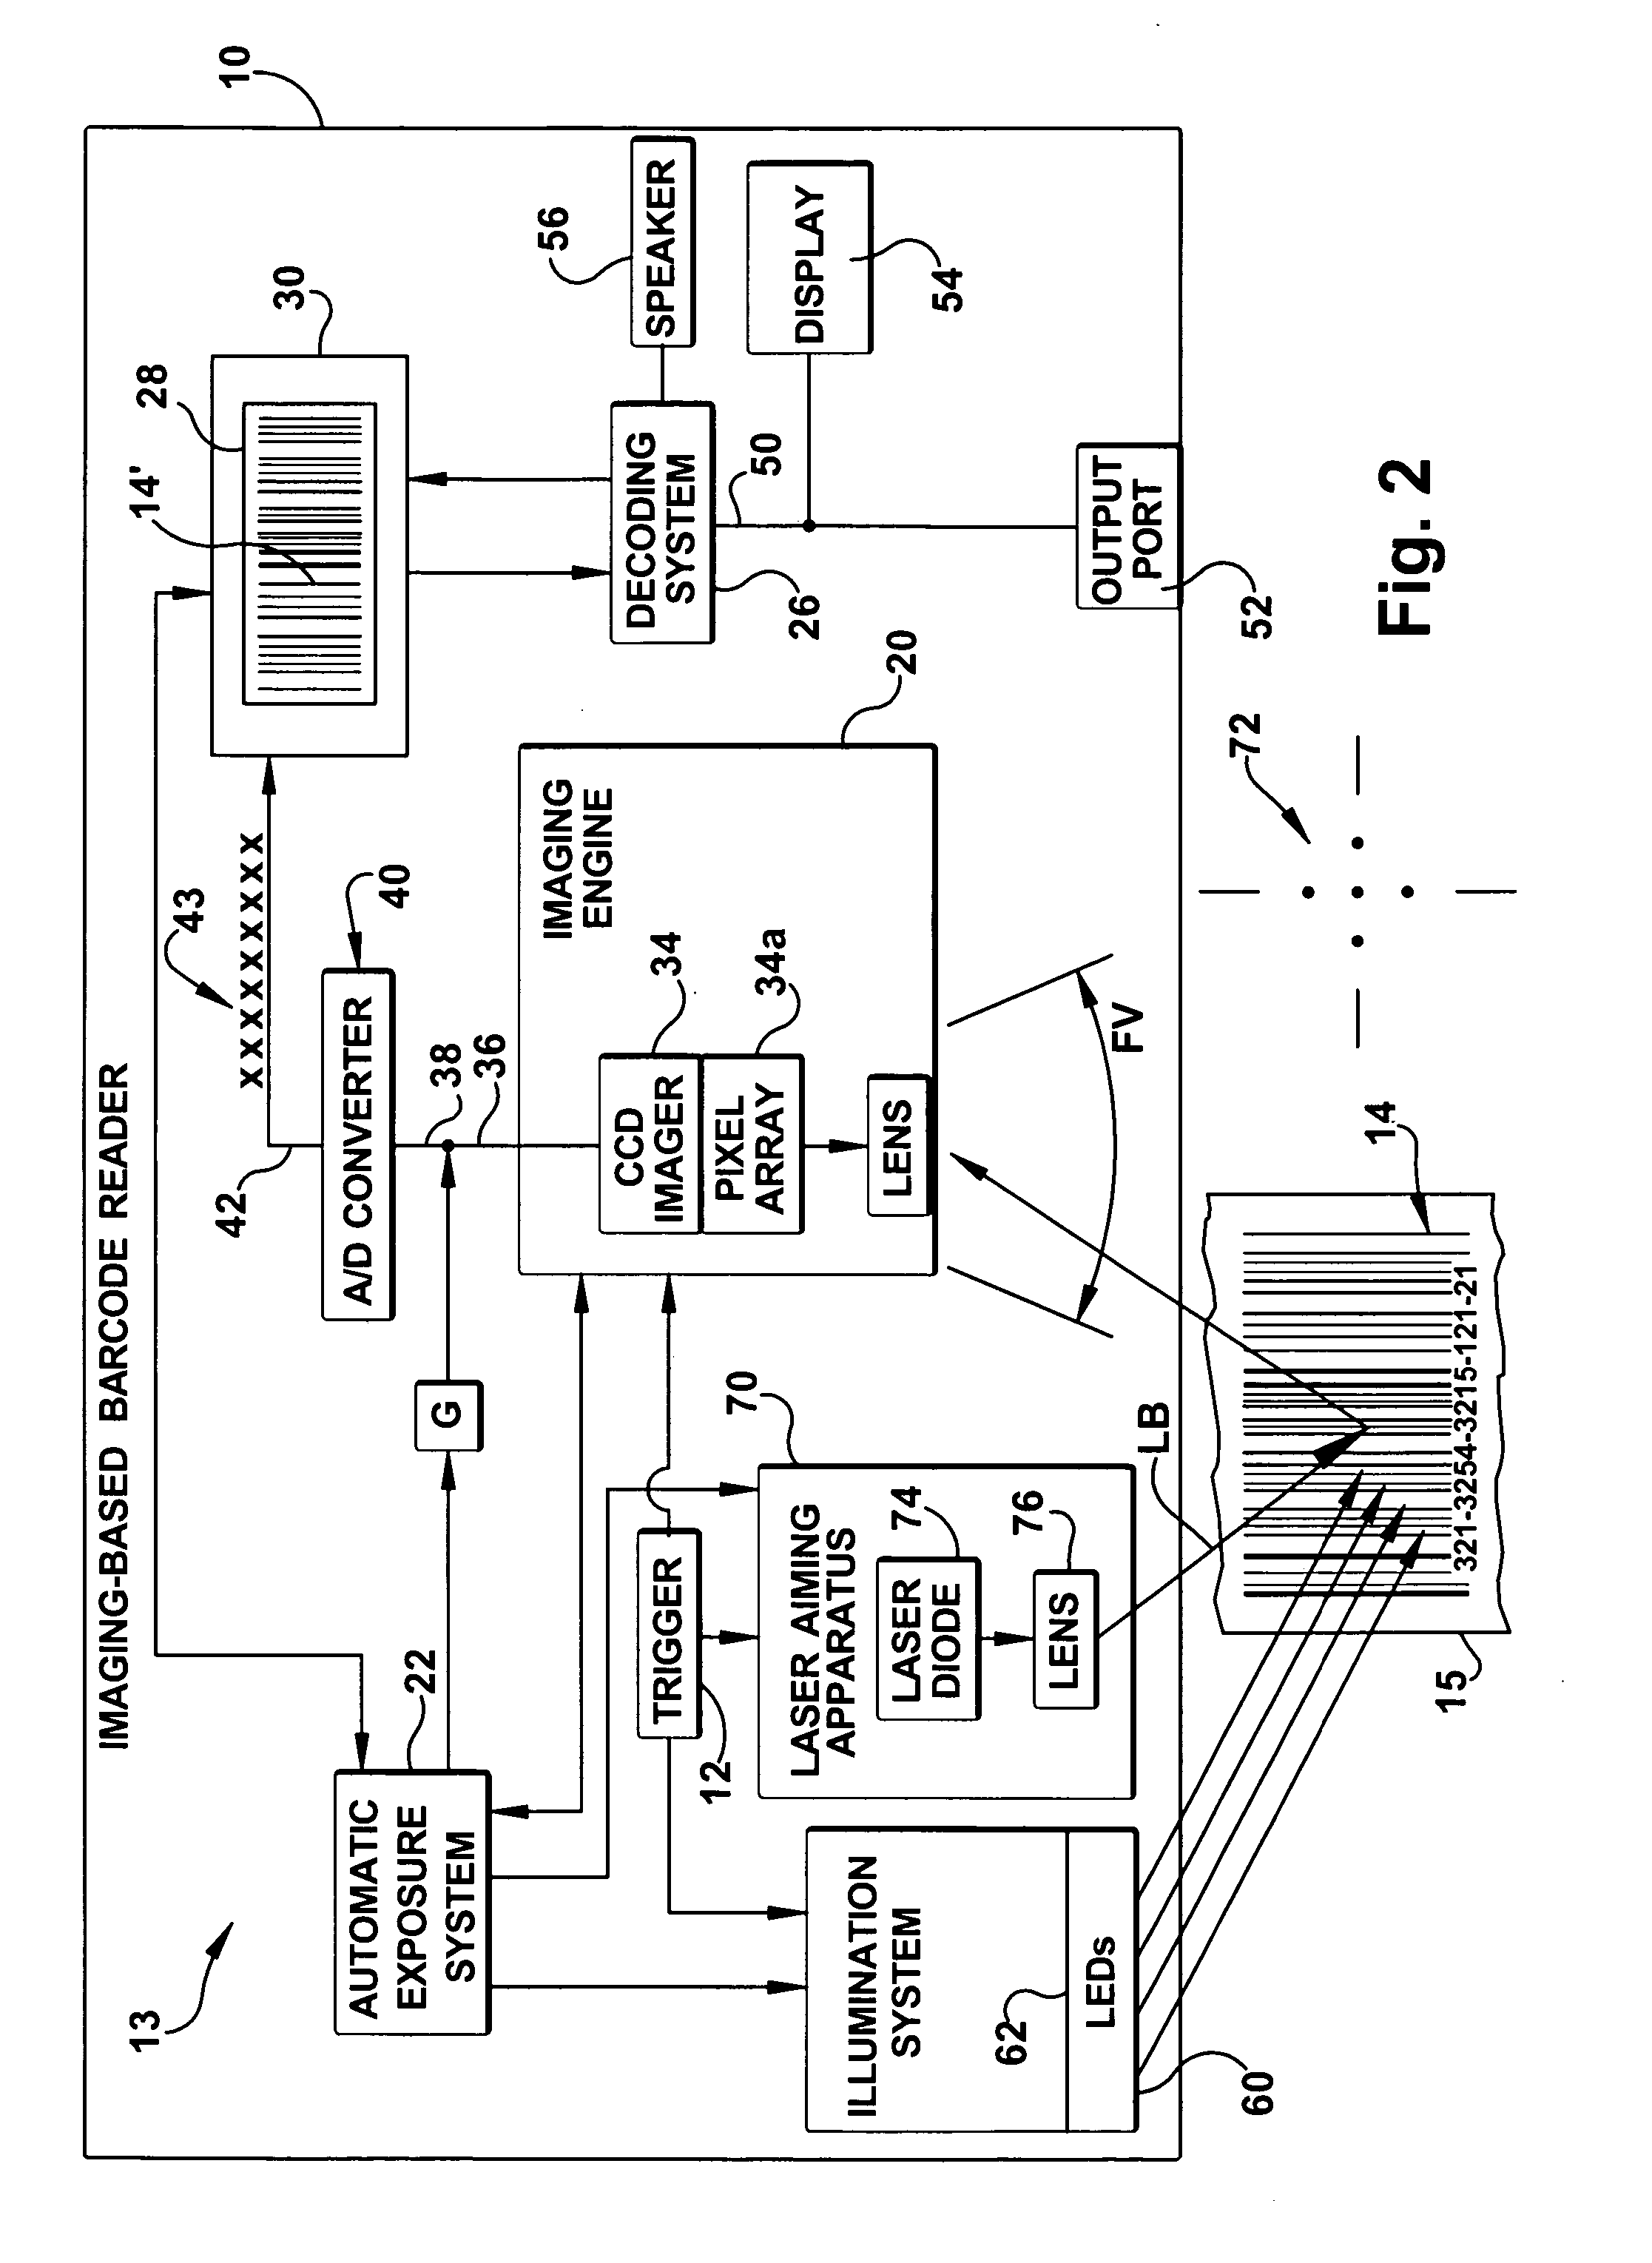 Automatic exposure system for imaging-based bar code reader